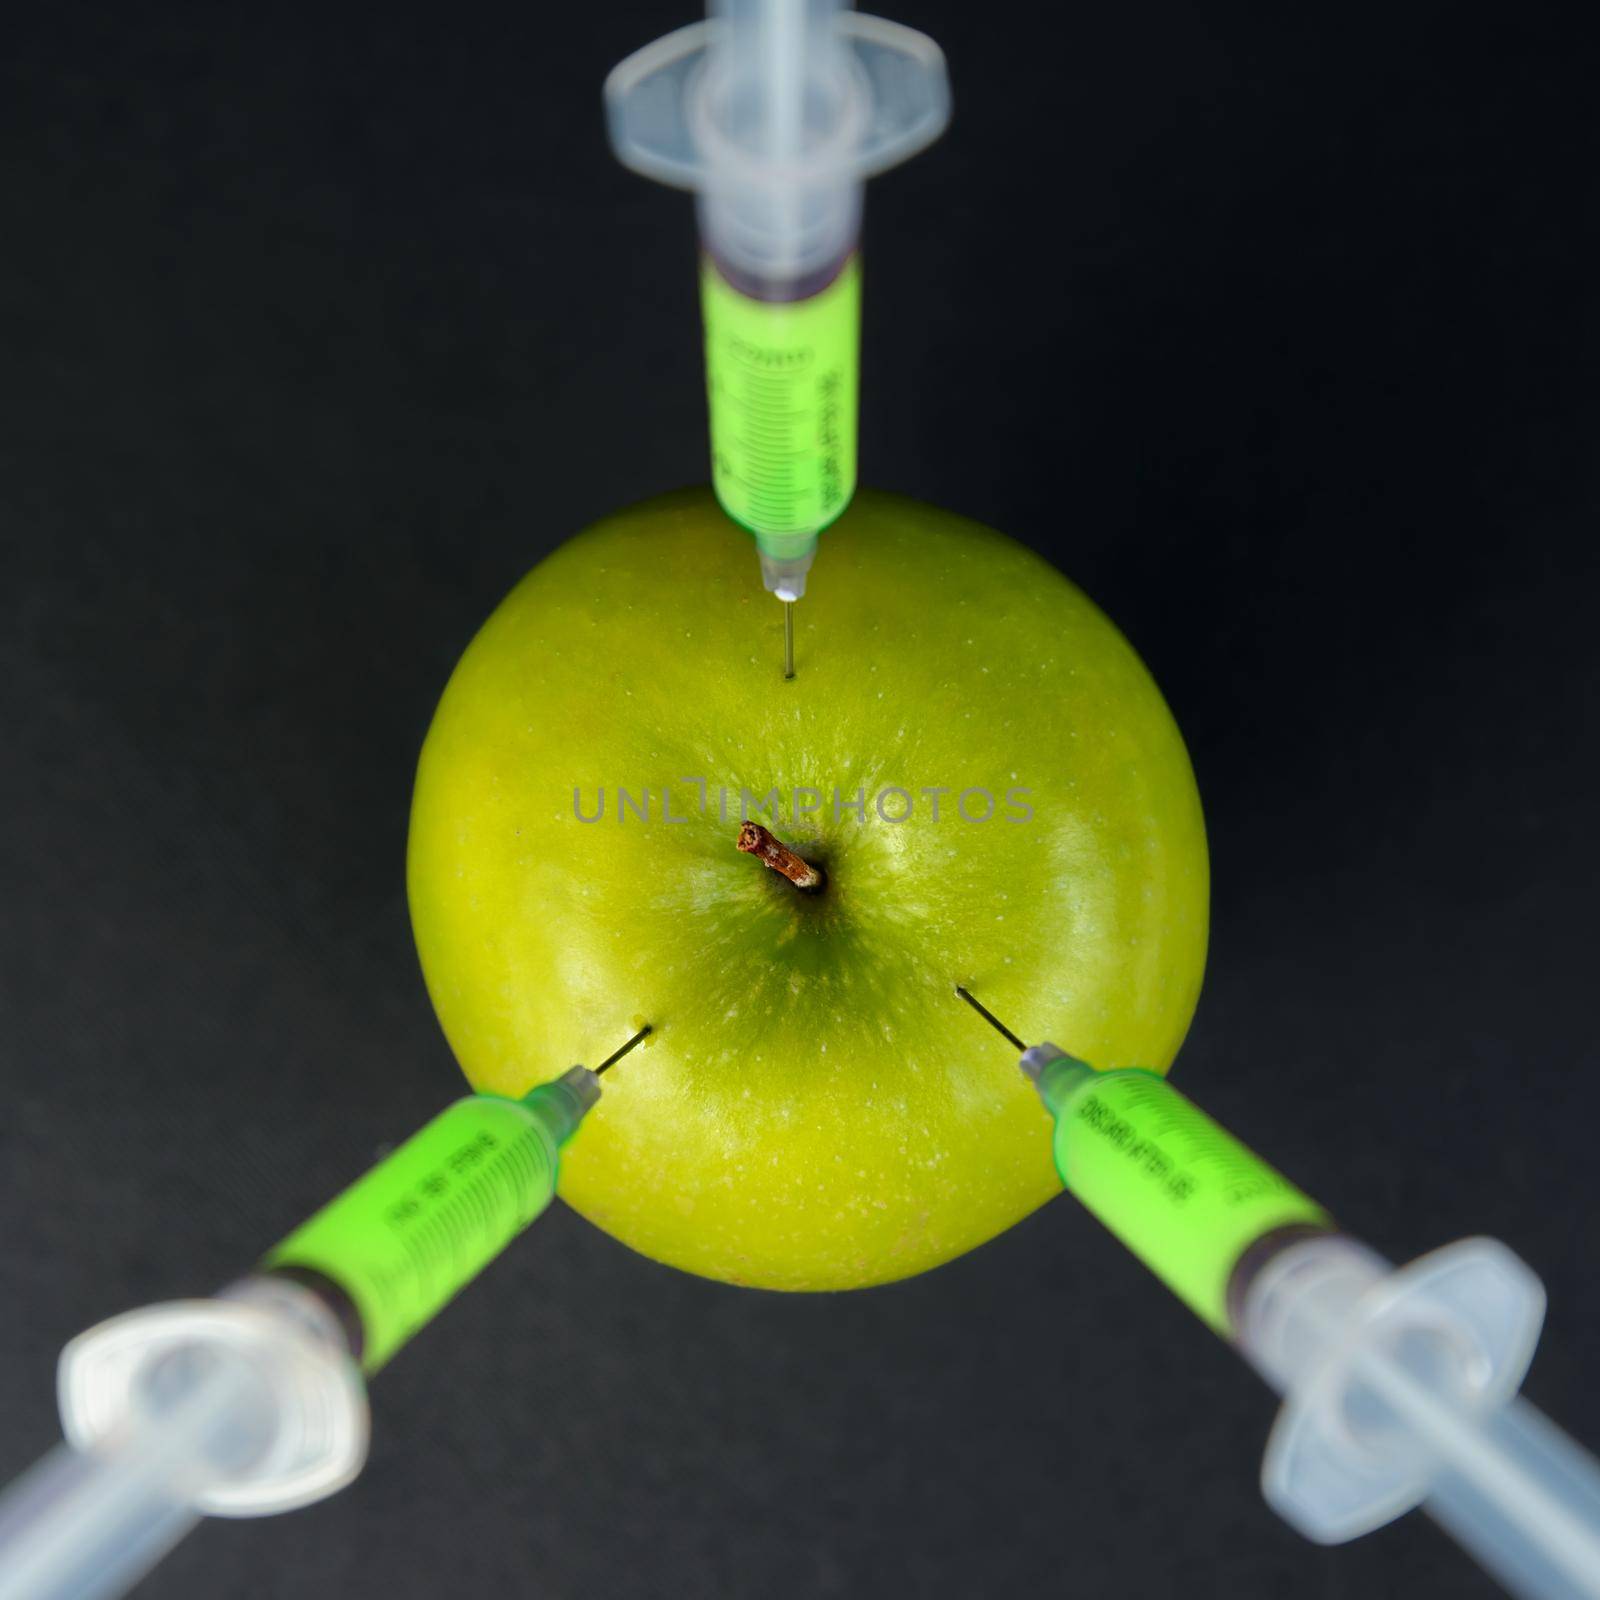 Red modification liquid in the syringe injected into green apple, top view